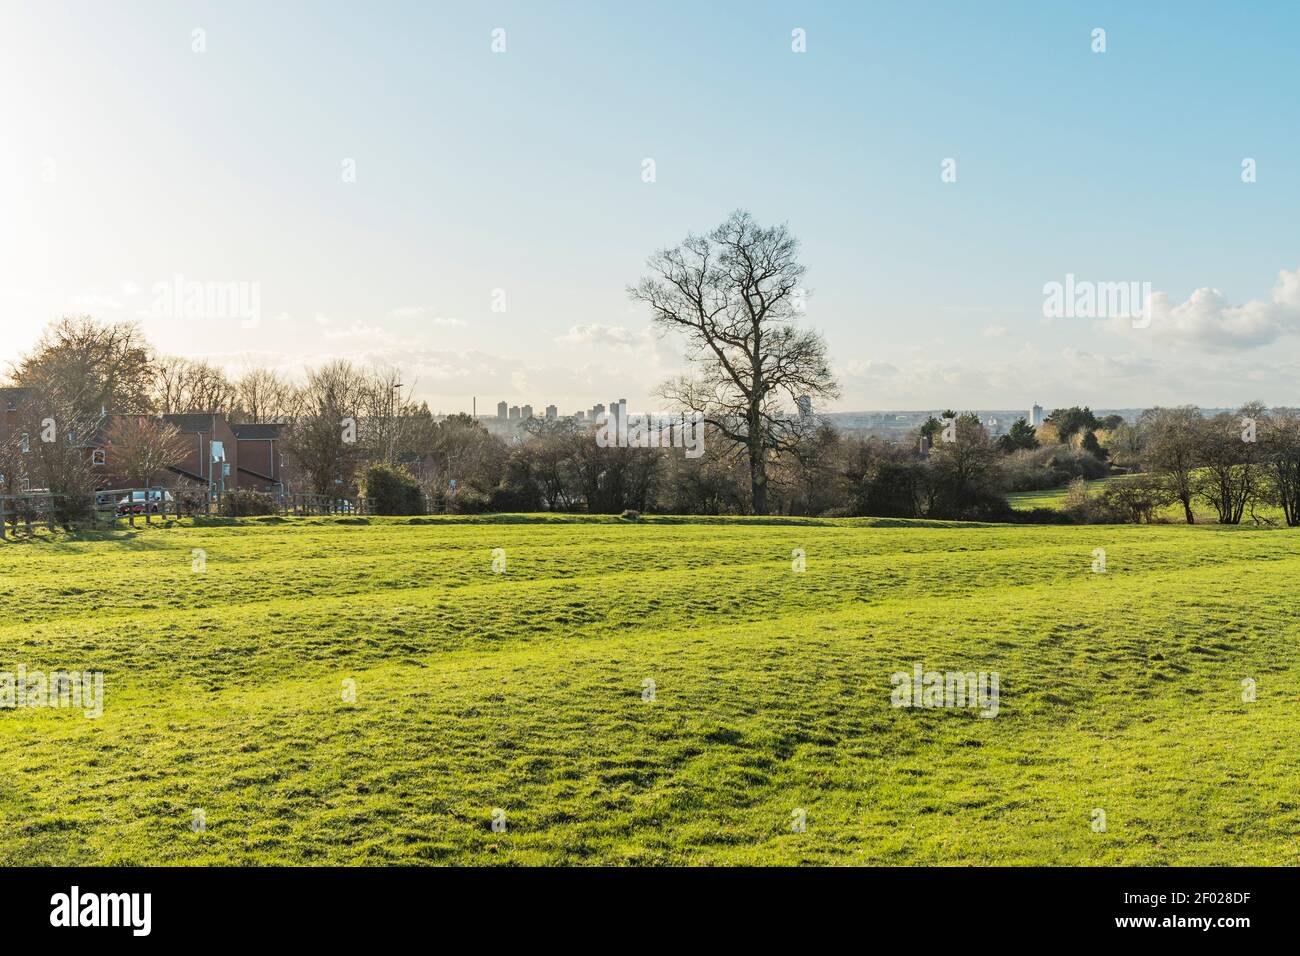 Rooftops, countryside, trees, fields, and high buildings in Leicester city centre, then with Charnwood Forest in the distance. Leicester city skyline. Stock Photo